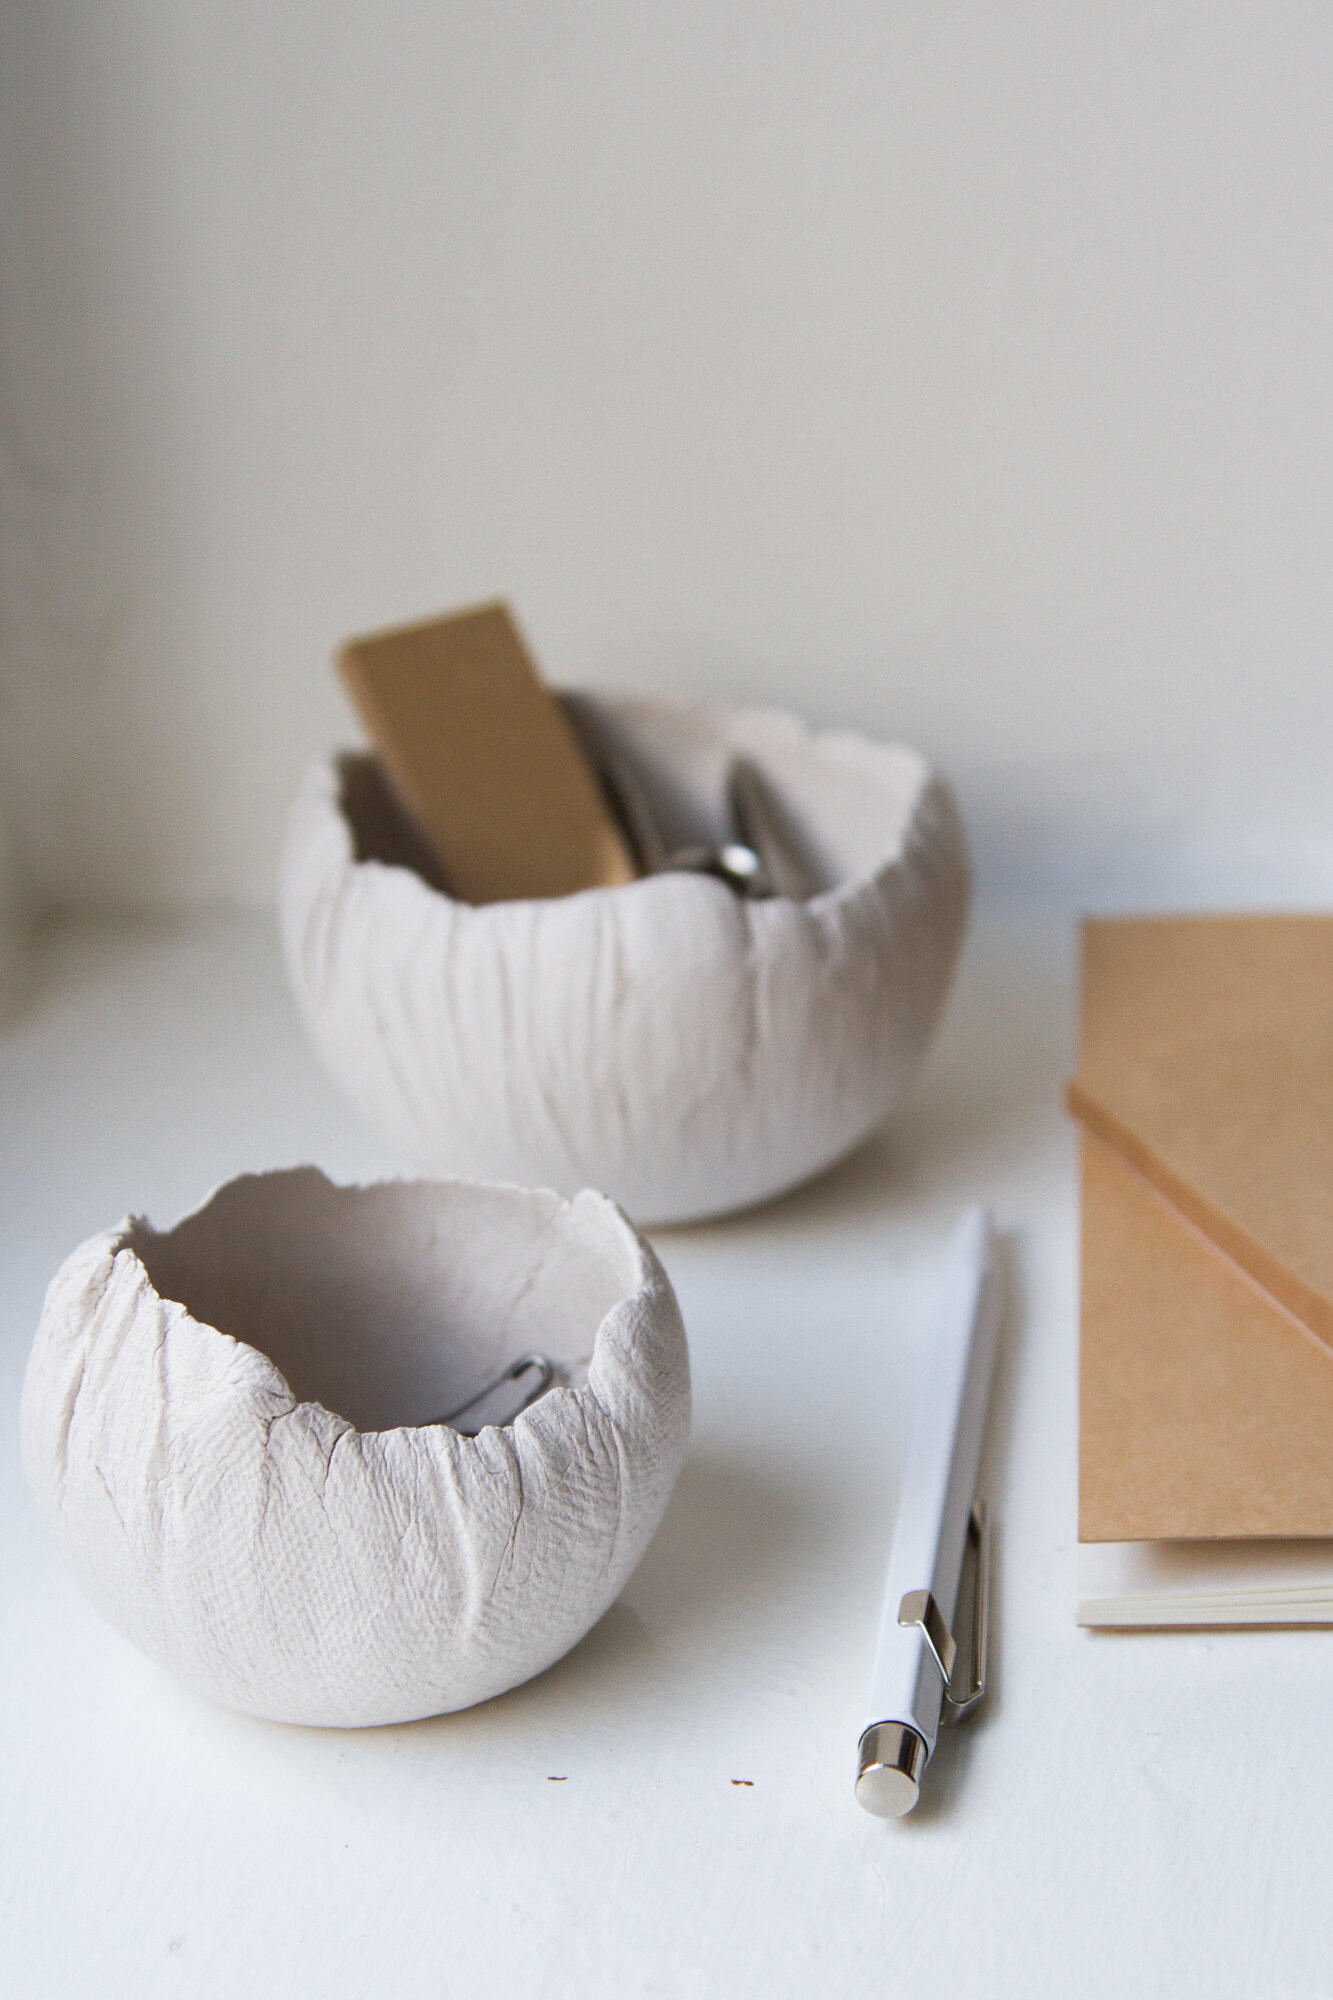 handmade clay vessel for keeping small things tidy | reading my tea leaves